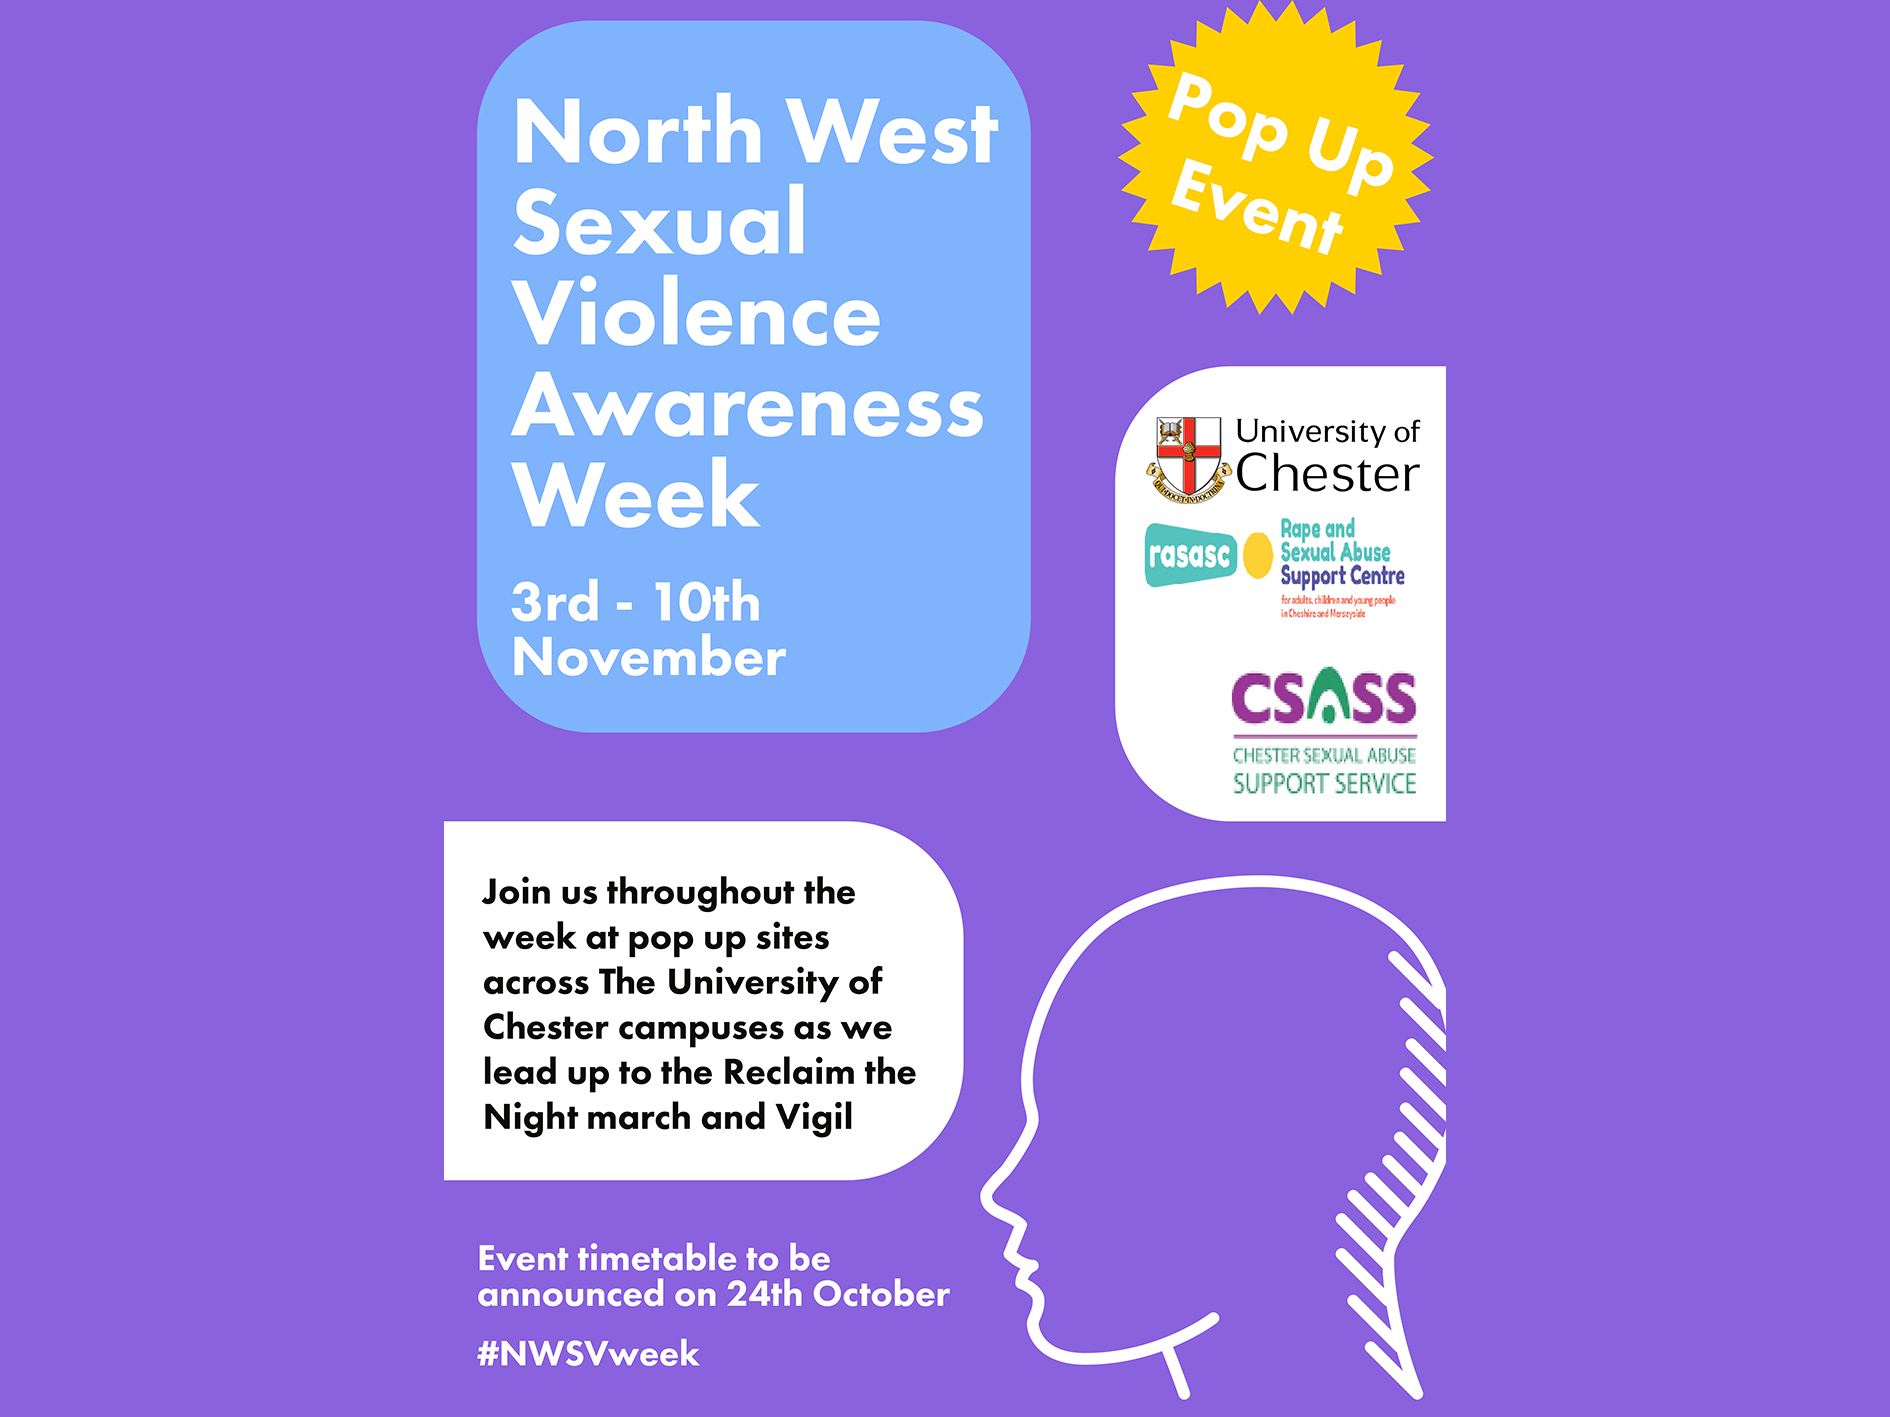 North West Sexual Violence Awareness Week